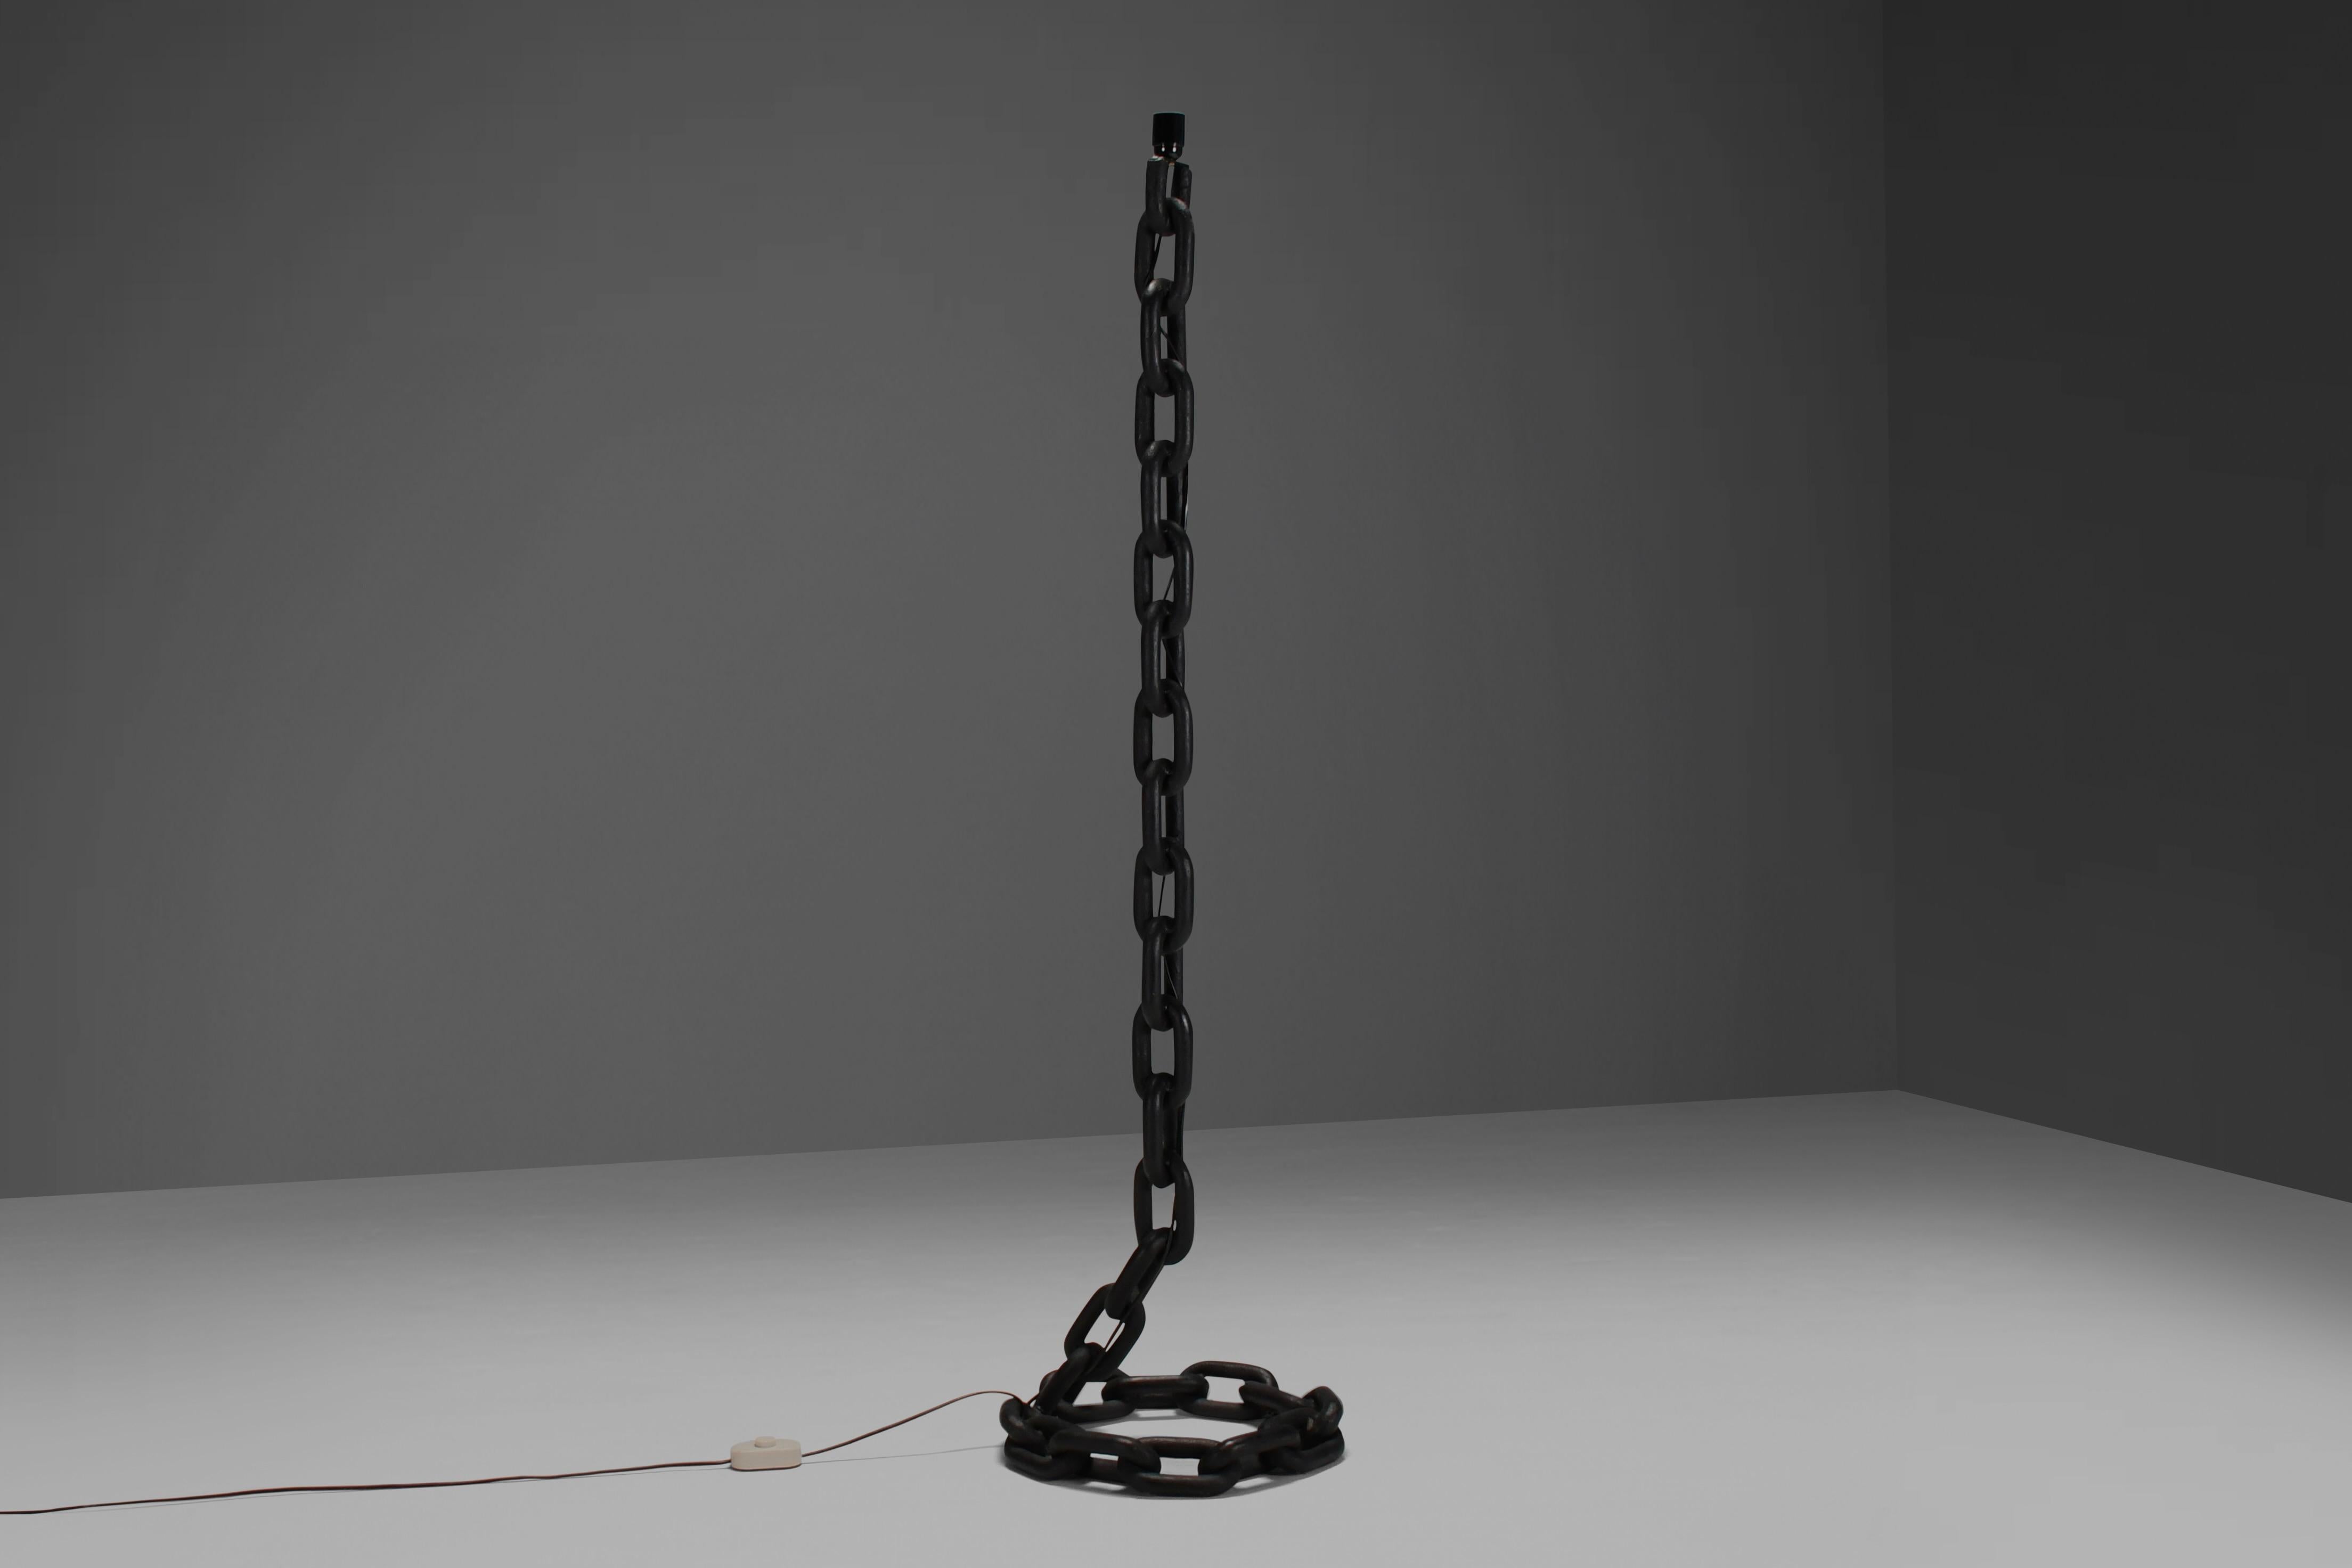 Very heavy brutalist floor lamp in very good condition.

Made from rustic iron chain which is welded together and is lacquered in a matte black color.

This lamp is attributed to the Austrian Artist Franz West.

We offer a variety of insured